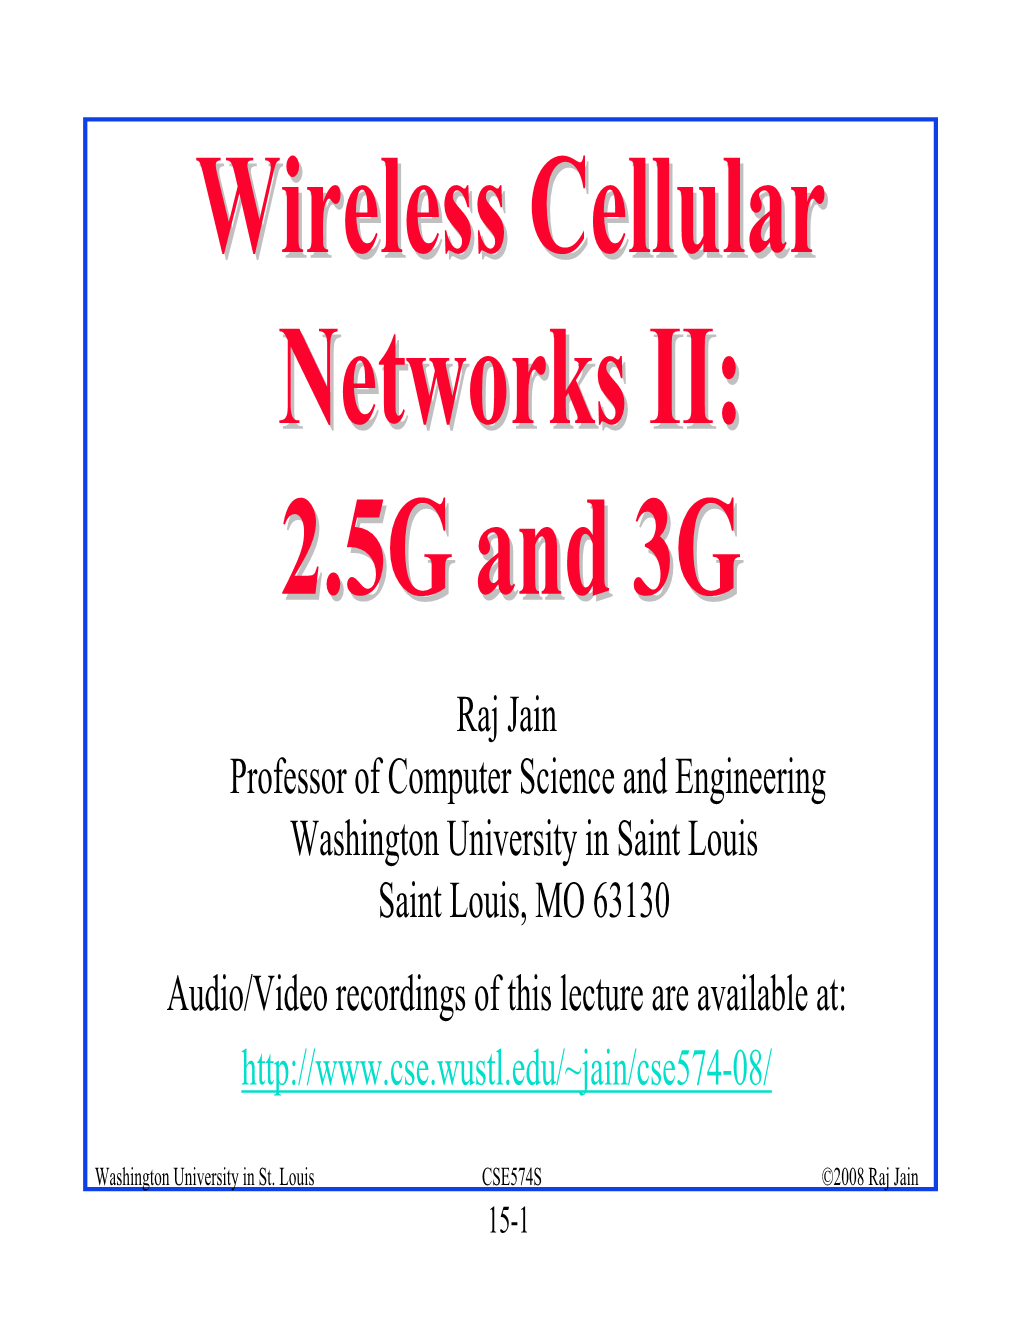 Wireless Cellular Networks II: 2.5G and 3G